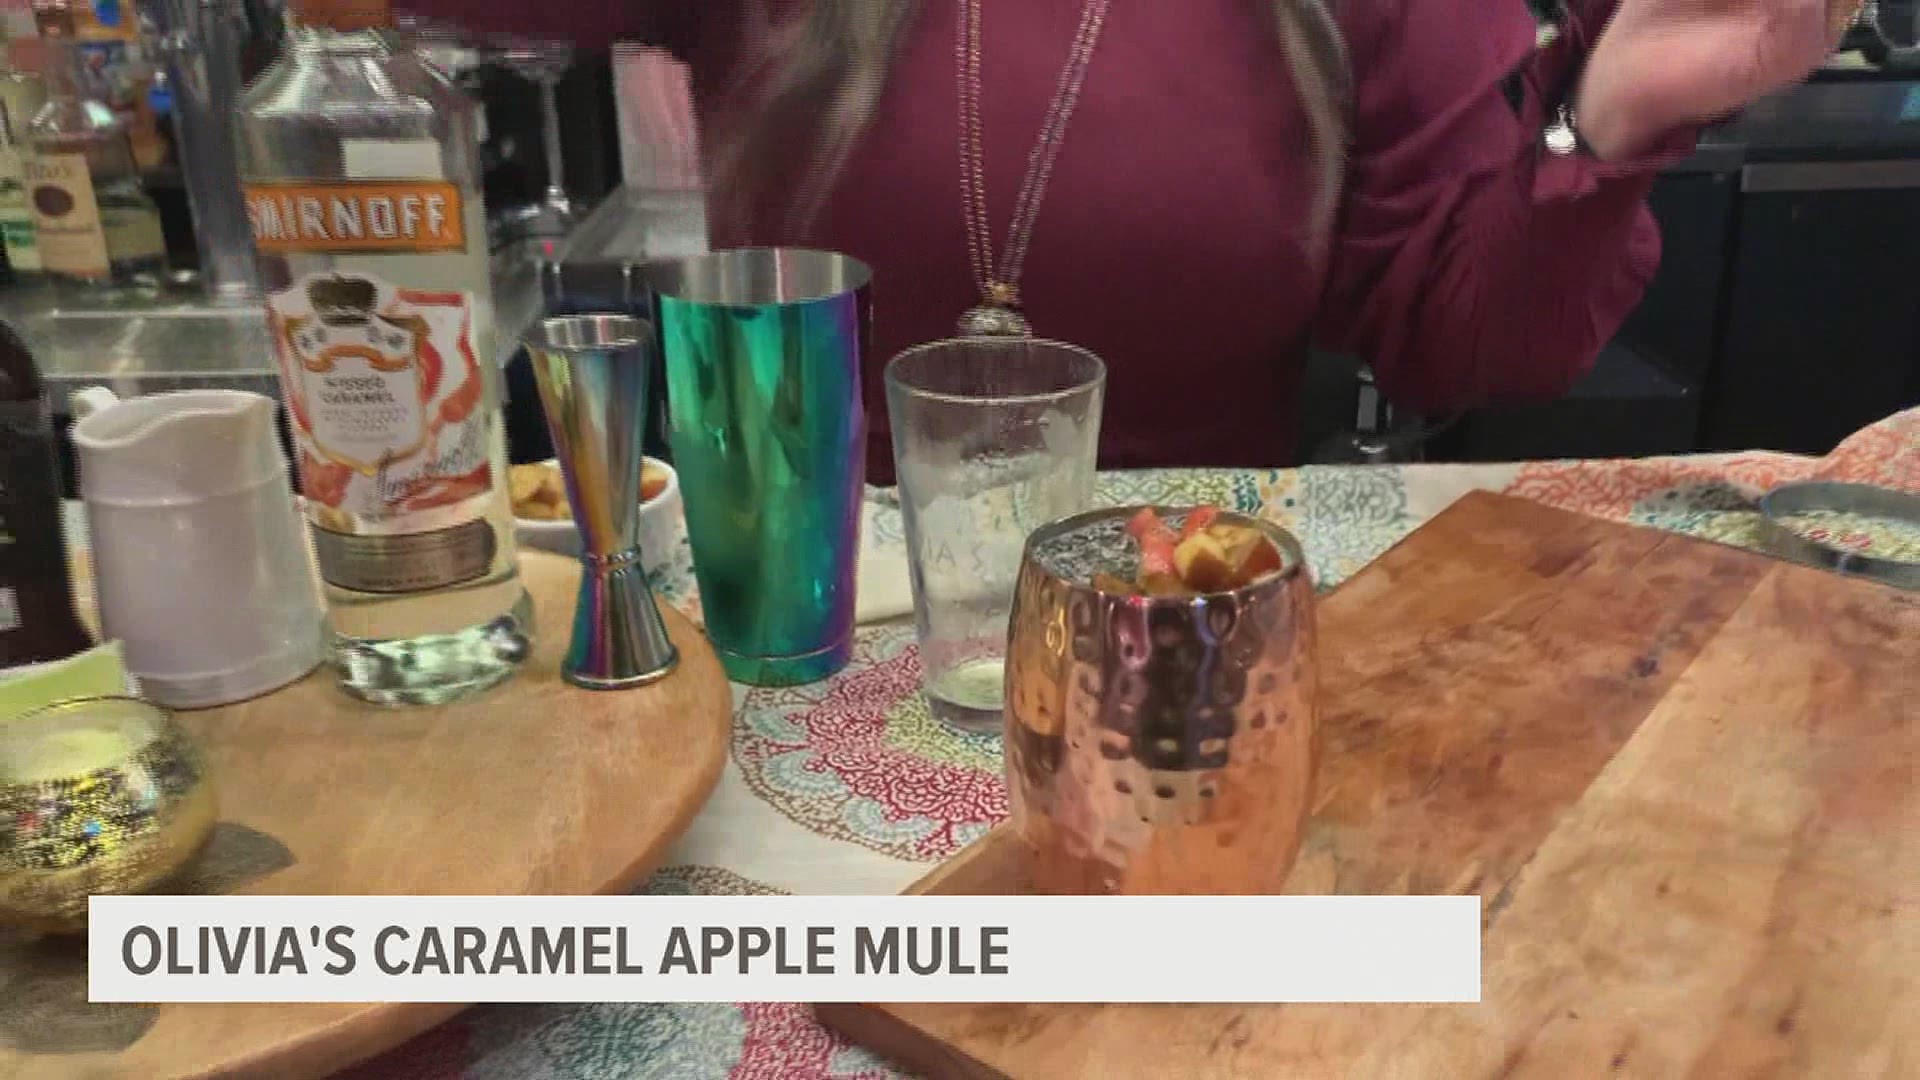 COVID-19 may keep Olivia's out of our FOX43 Kitchen, but they joined us via Skype to prepare the Caramel Apple Mule Drink for your Thanksgiving day feast